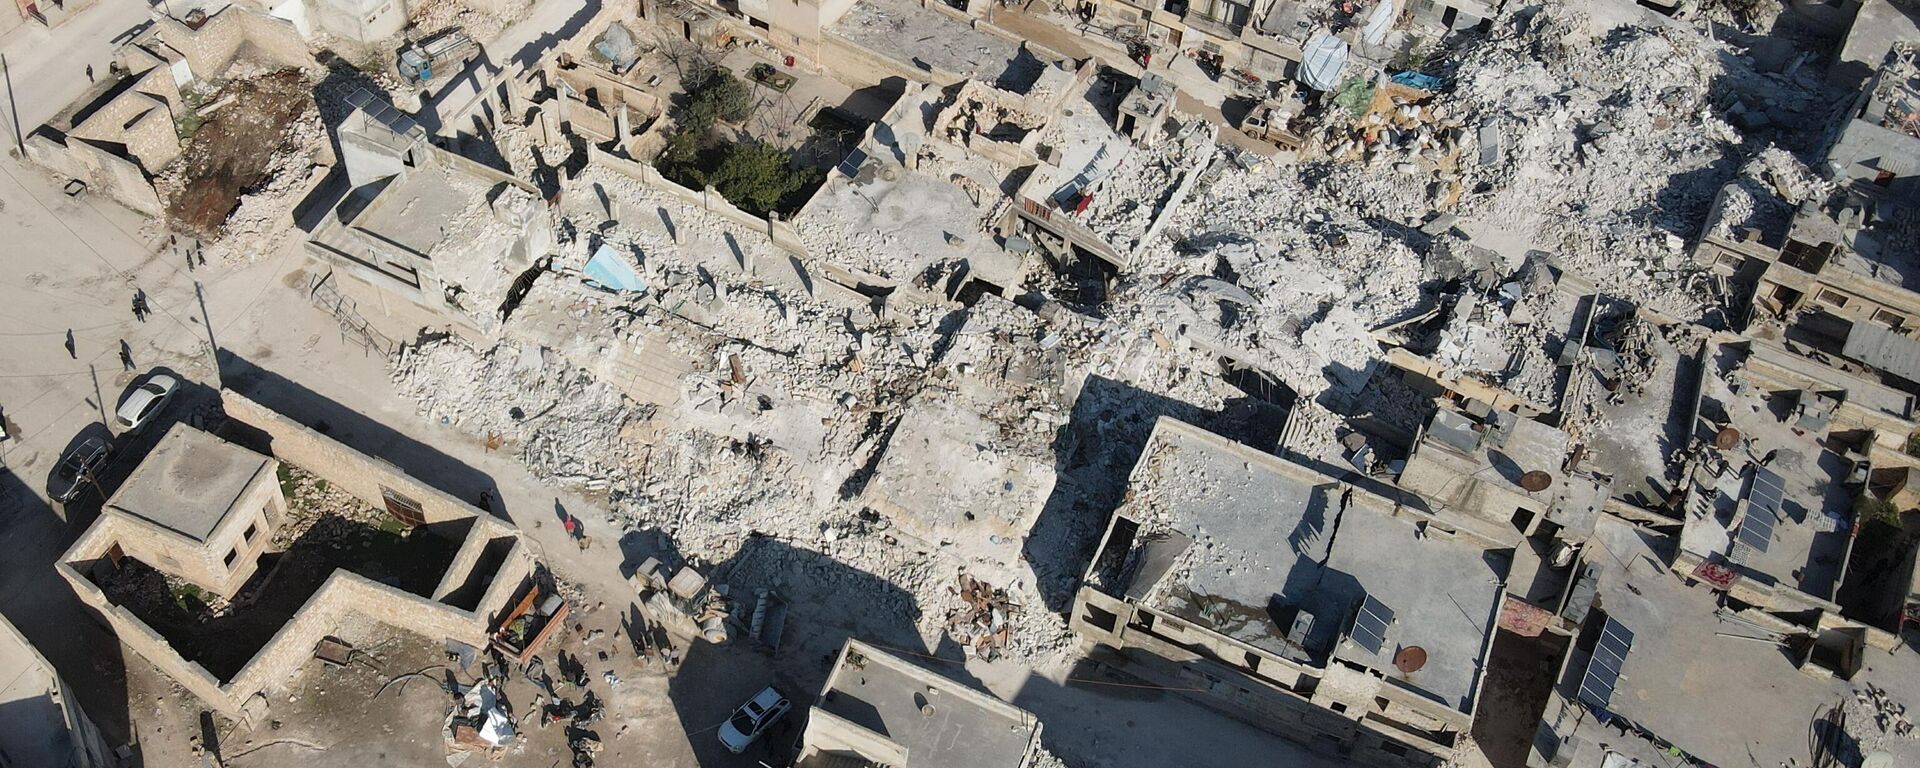 An aerial view shows collapsed buildings following last week's earthquake in Syria's rebel-held village of Atarib, in the northwestern Aleppo province, on February 14, 2023. - Sputnik International, 1920, 15.02.2023